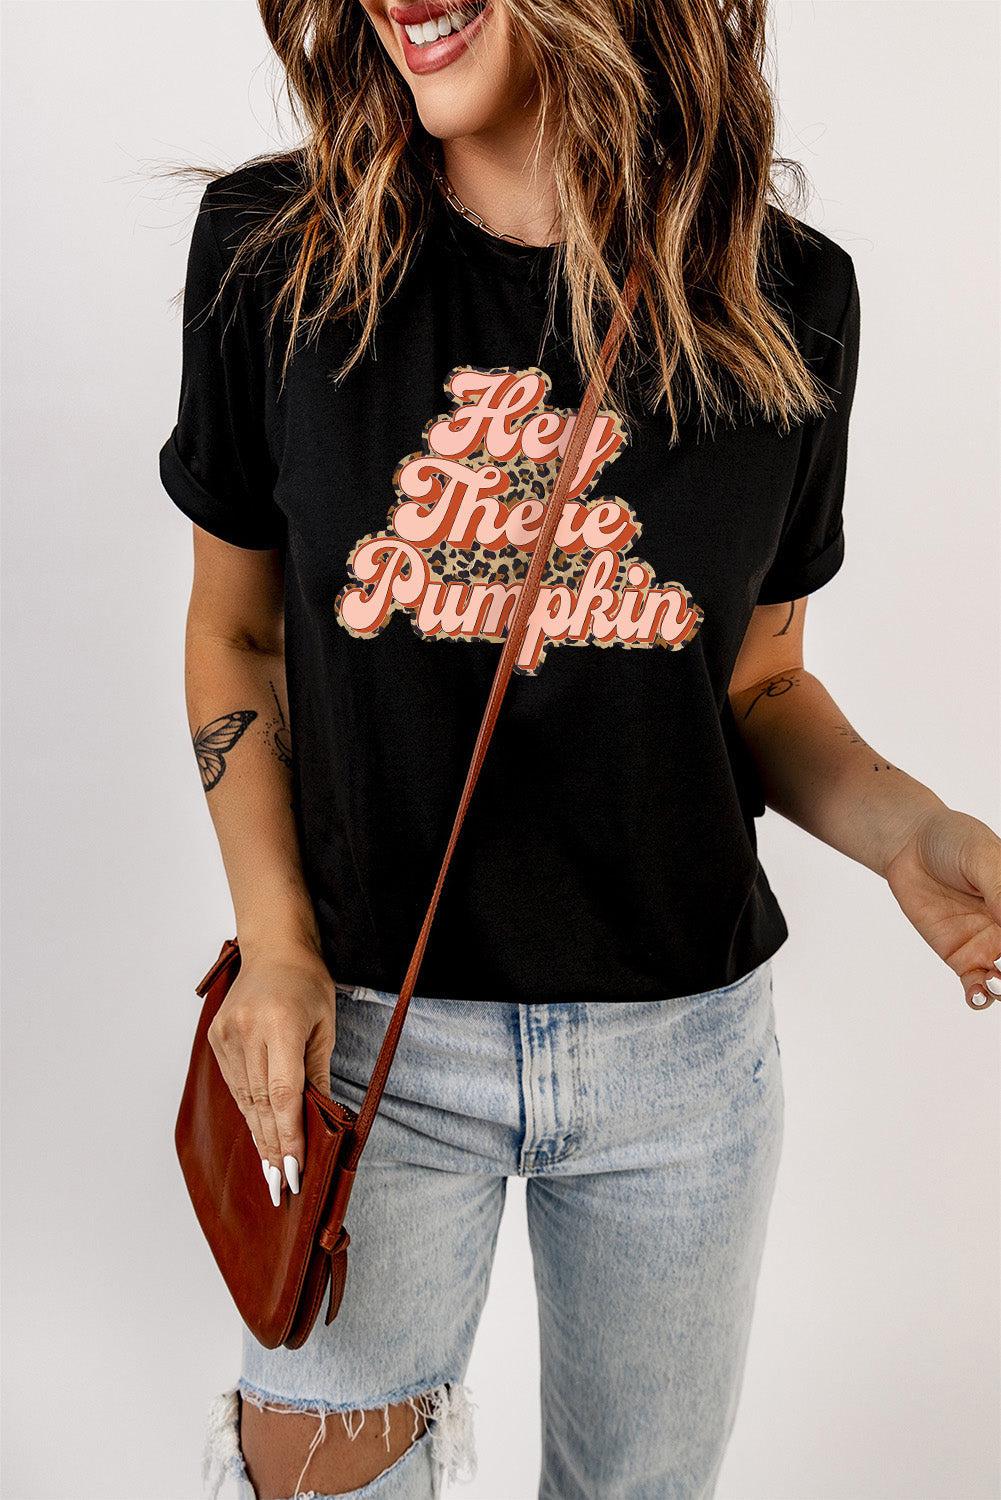 Short Sleeve Round neck HEY THERE PUMPKIN Graphic Tee BLUE ZONE PLANET